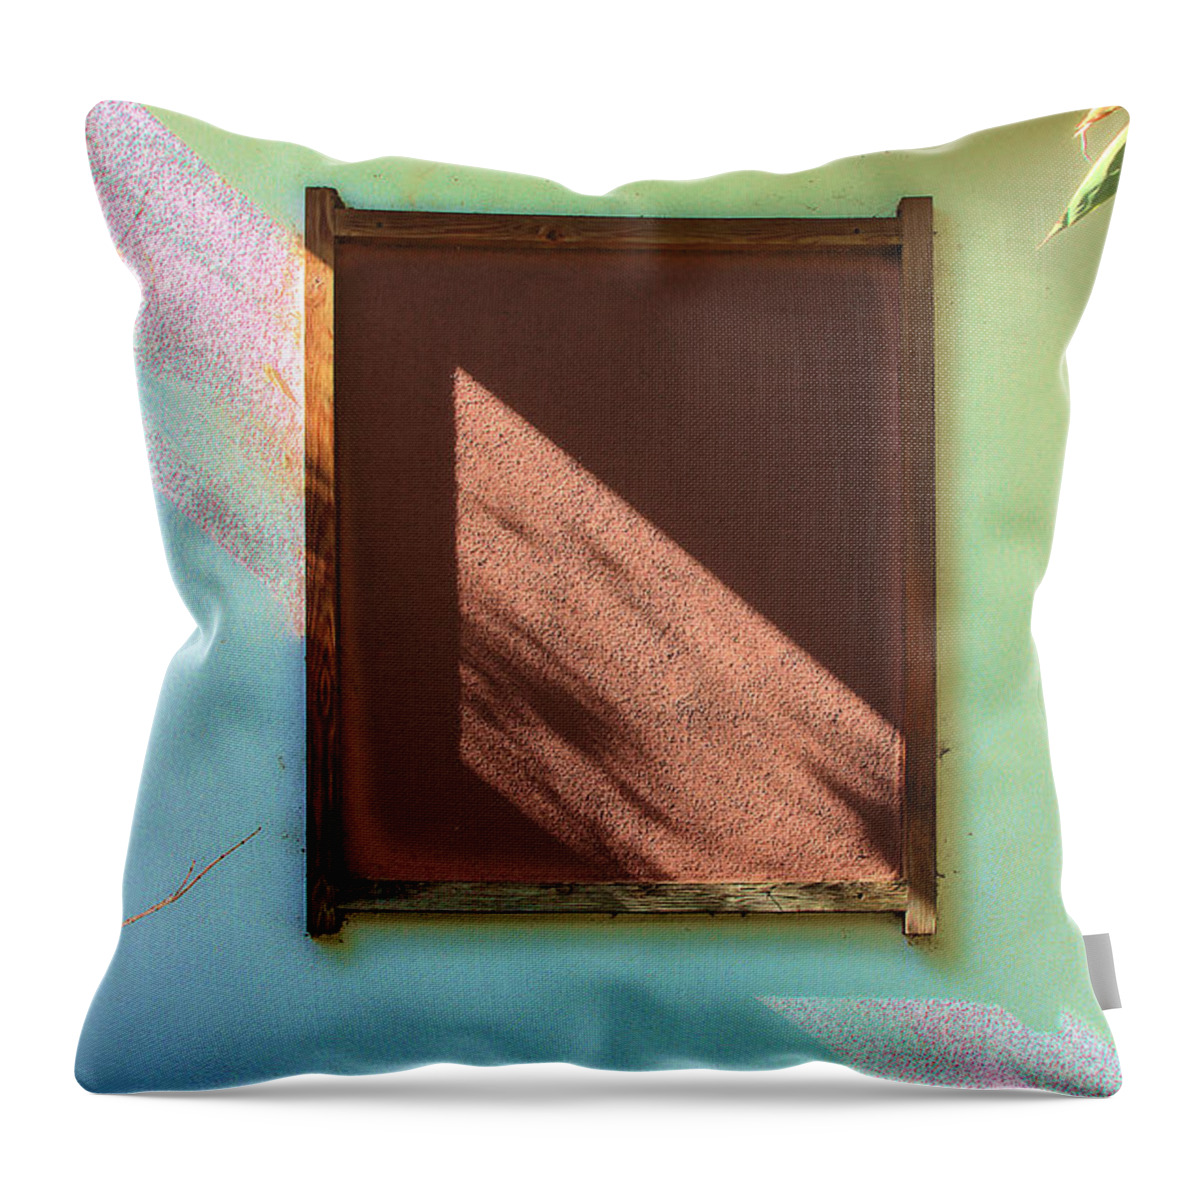 Closed Window Throw Pillow featuring the photograph Closed Window by Viktor Savchenko